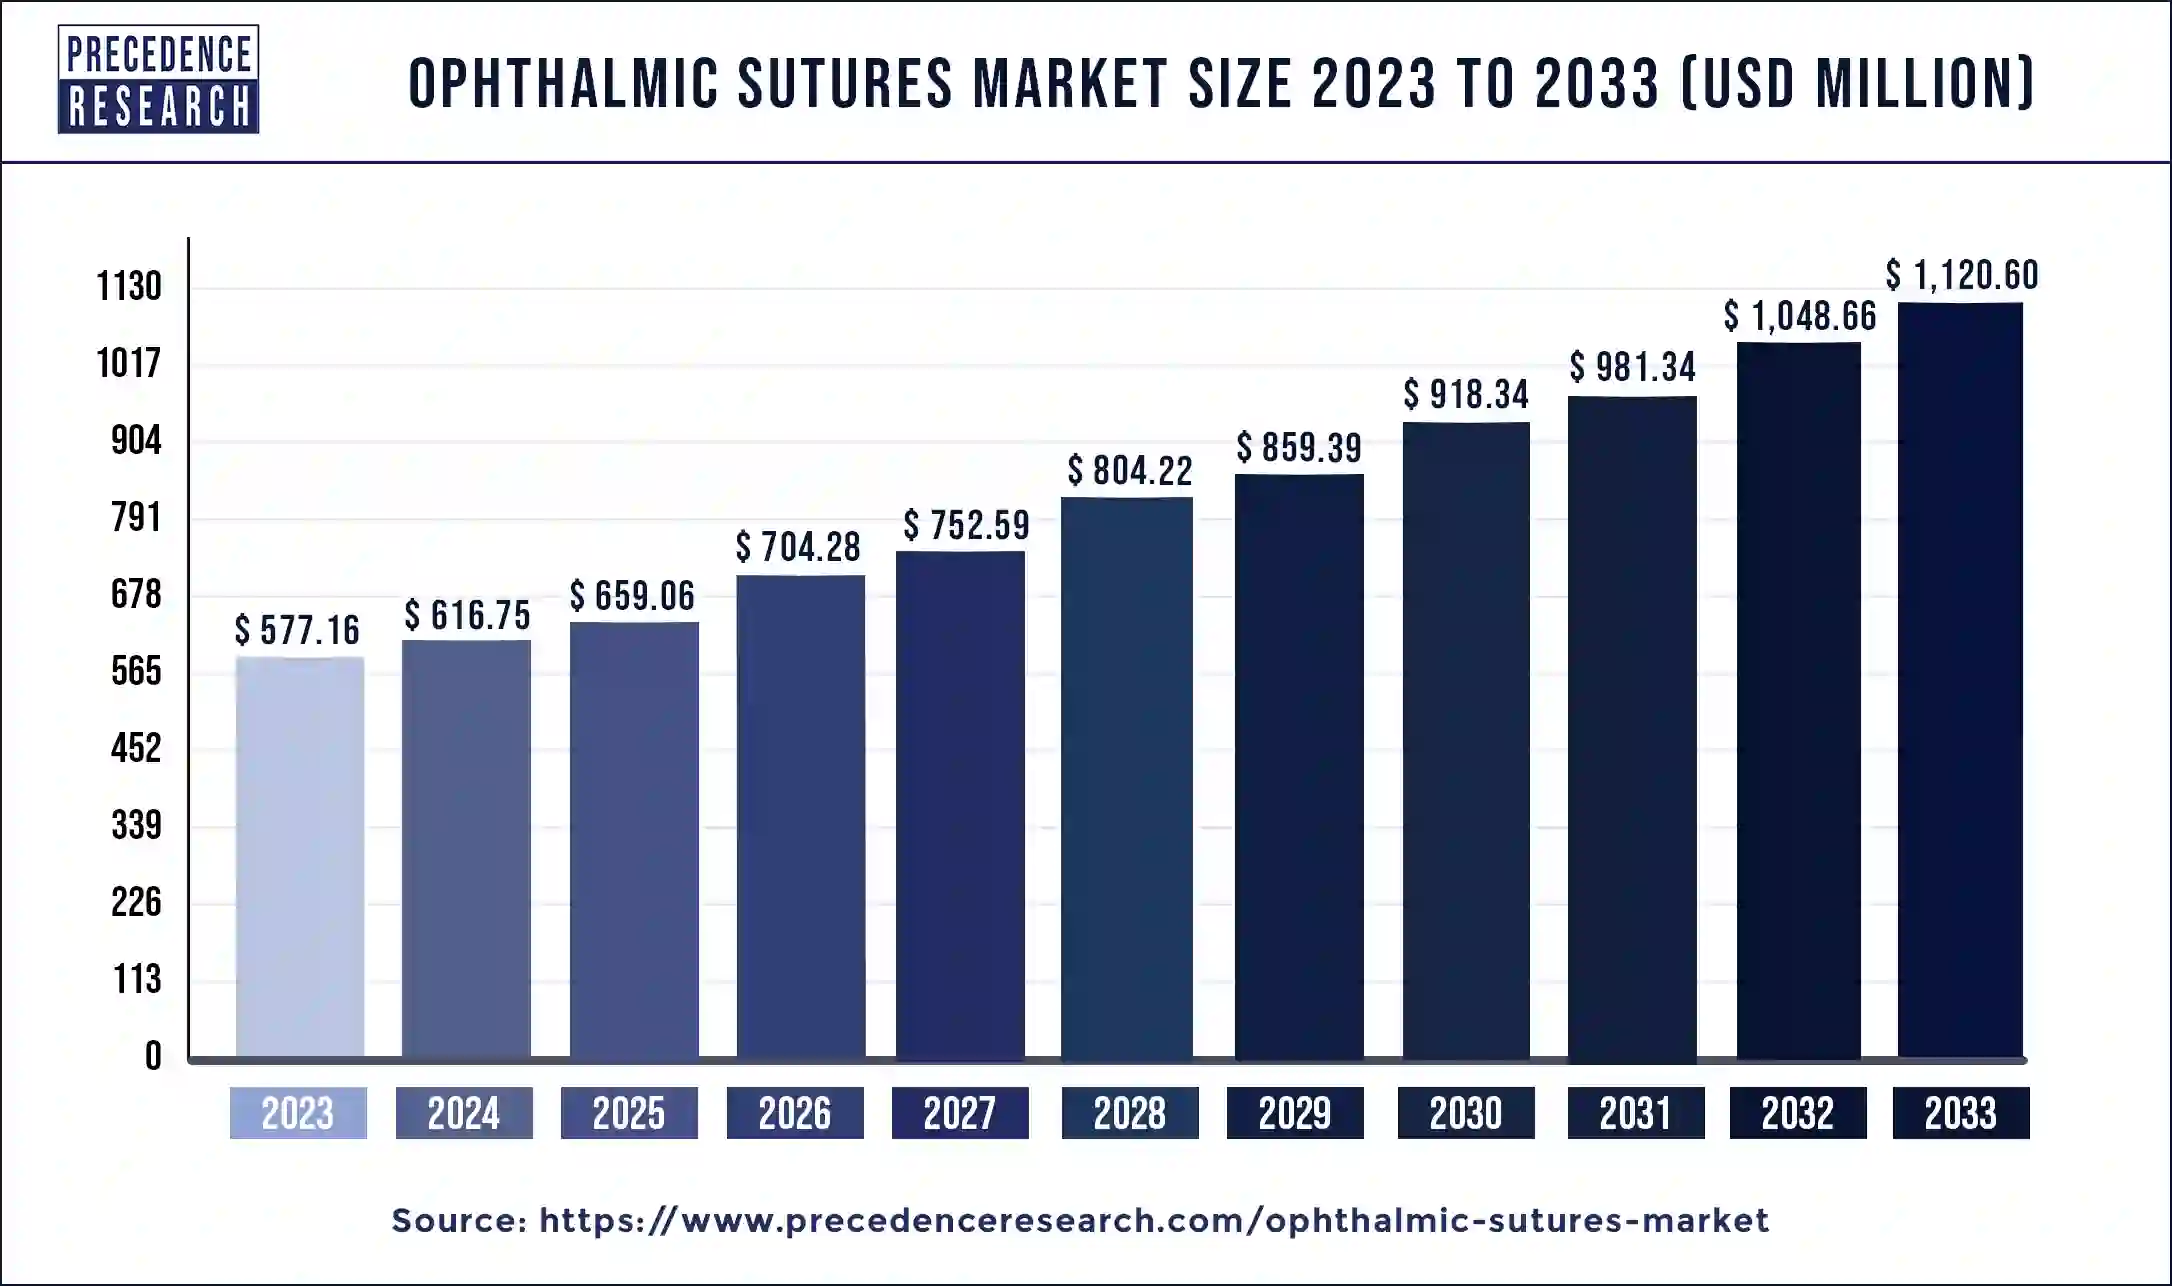 Ophthalmic Sutures Market Size 2024 to 2033